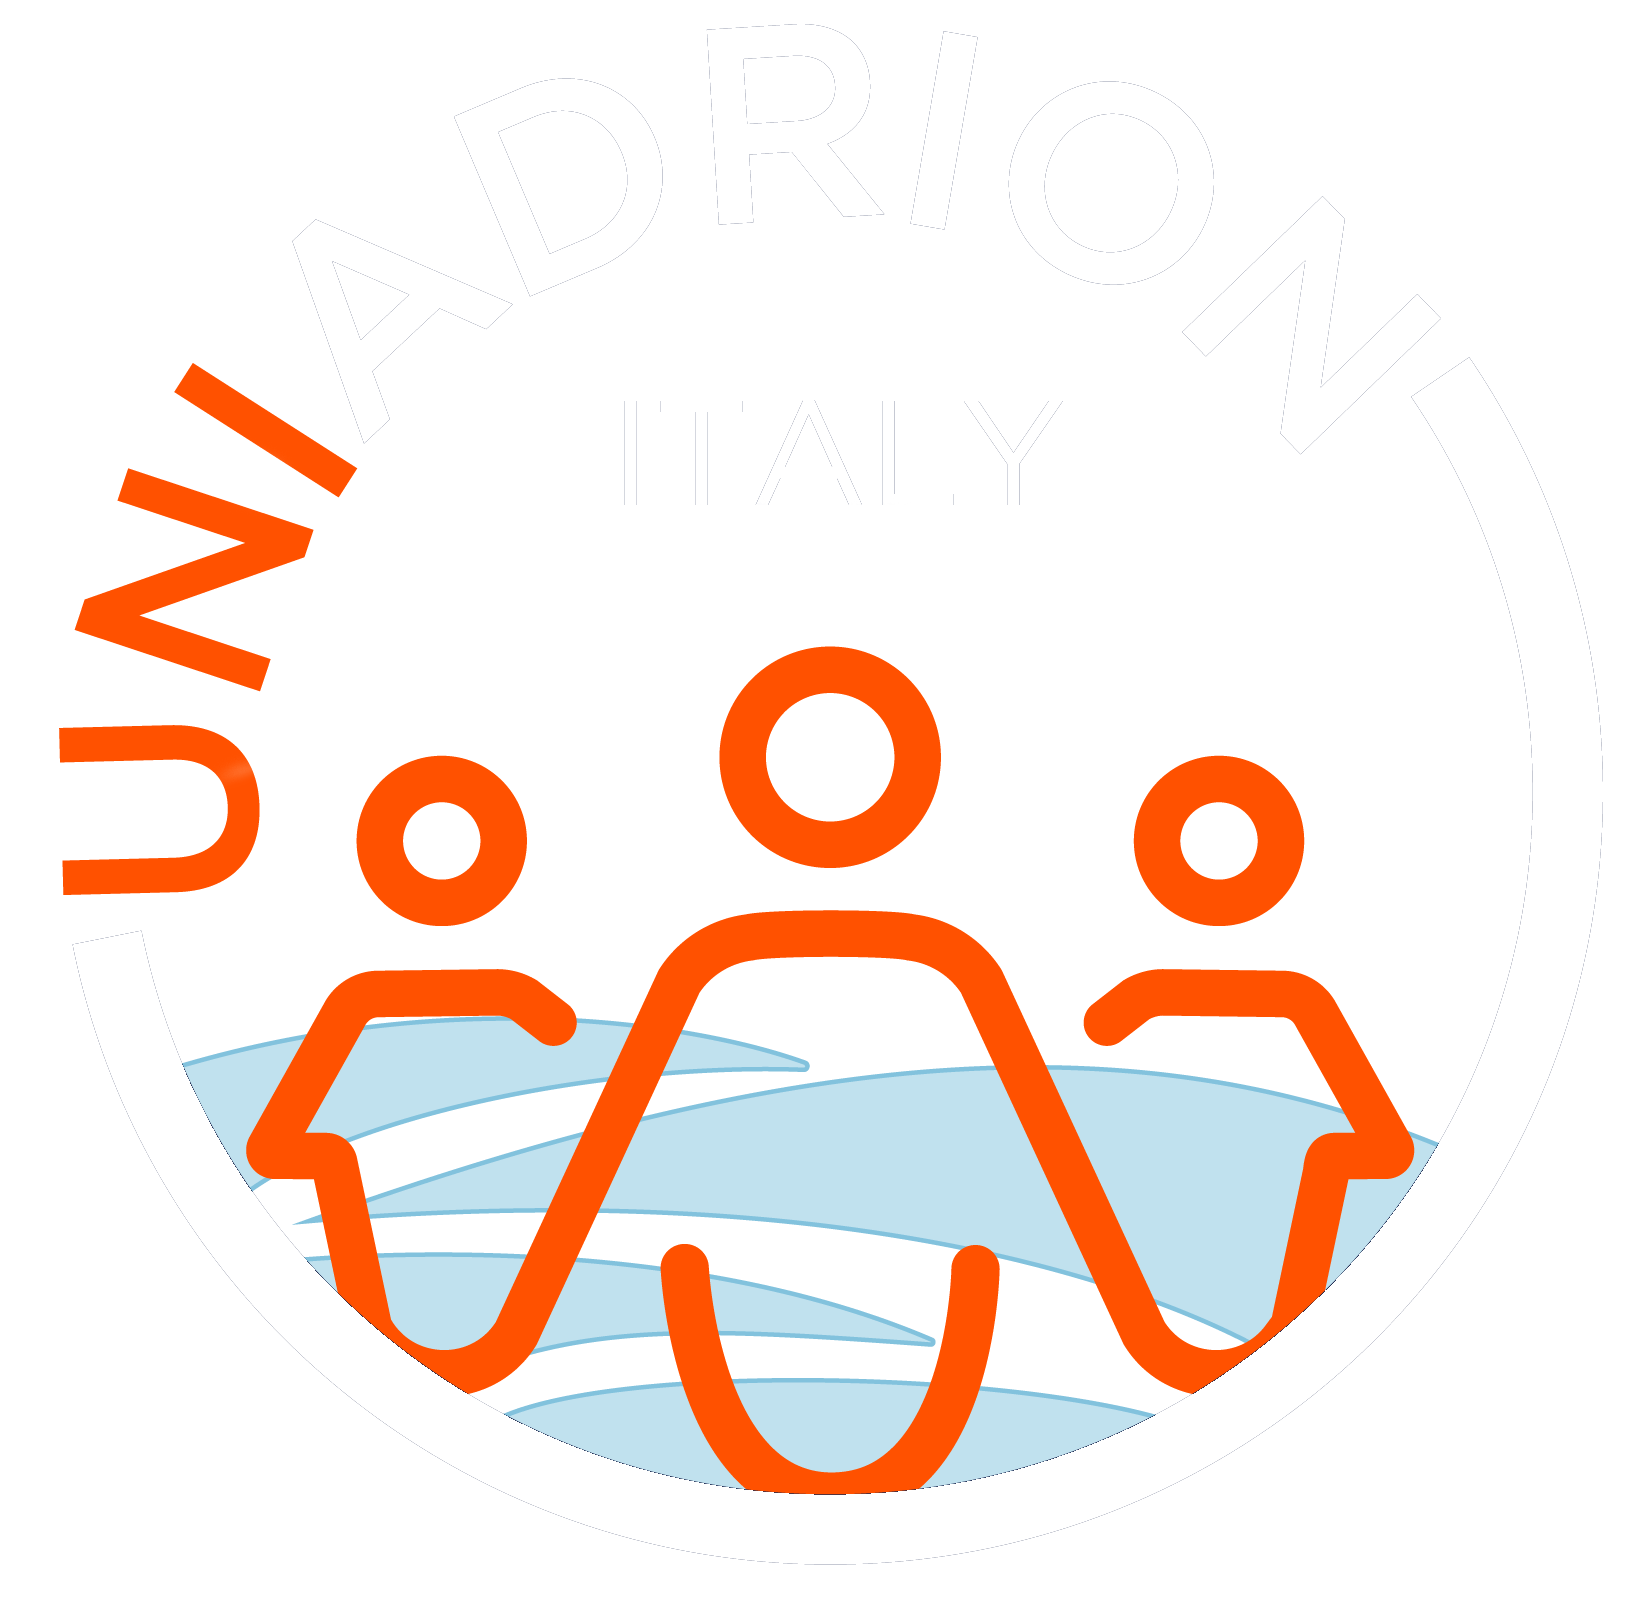 About Uniadrion Italy